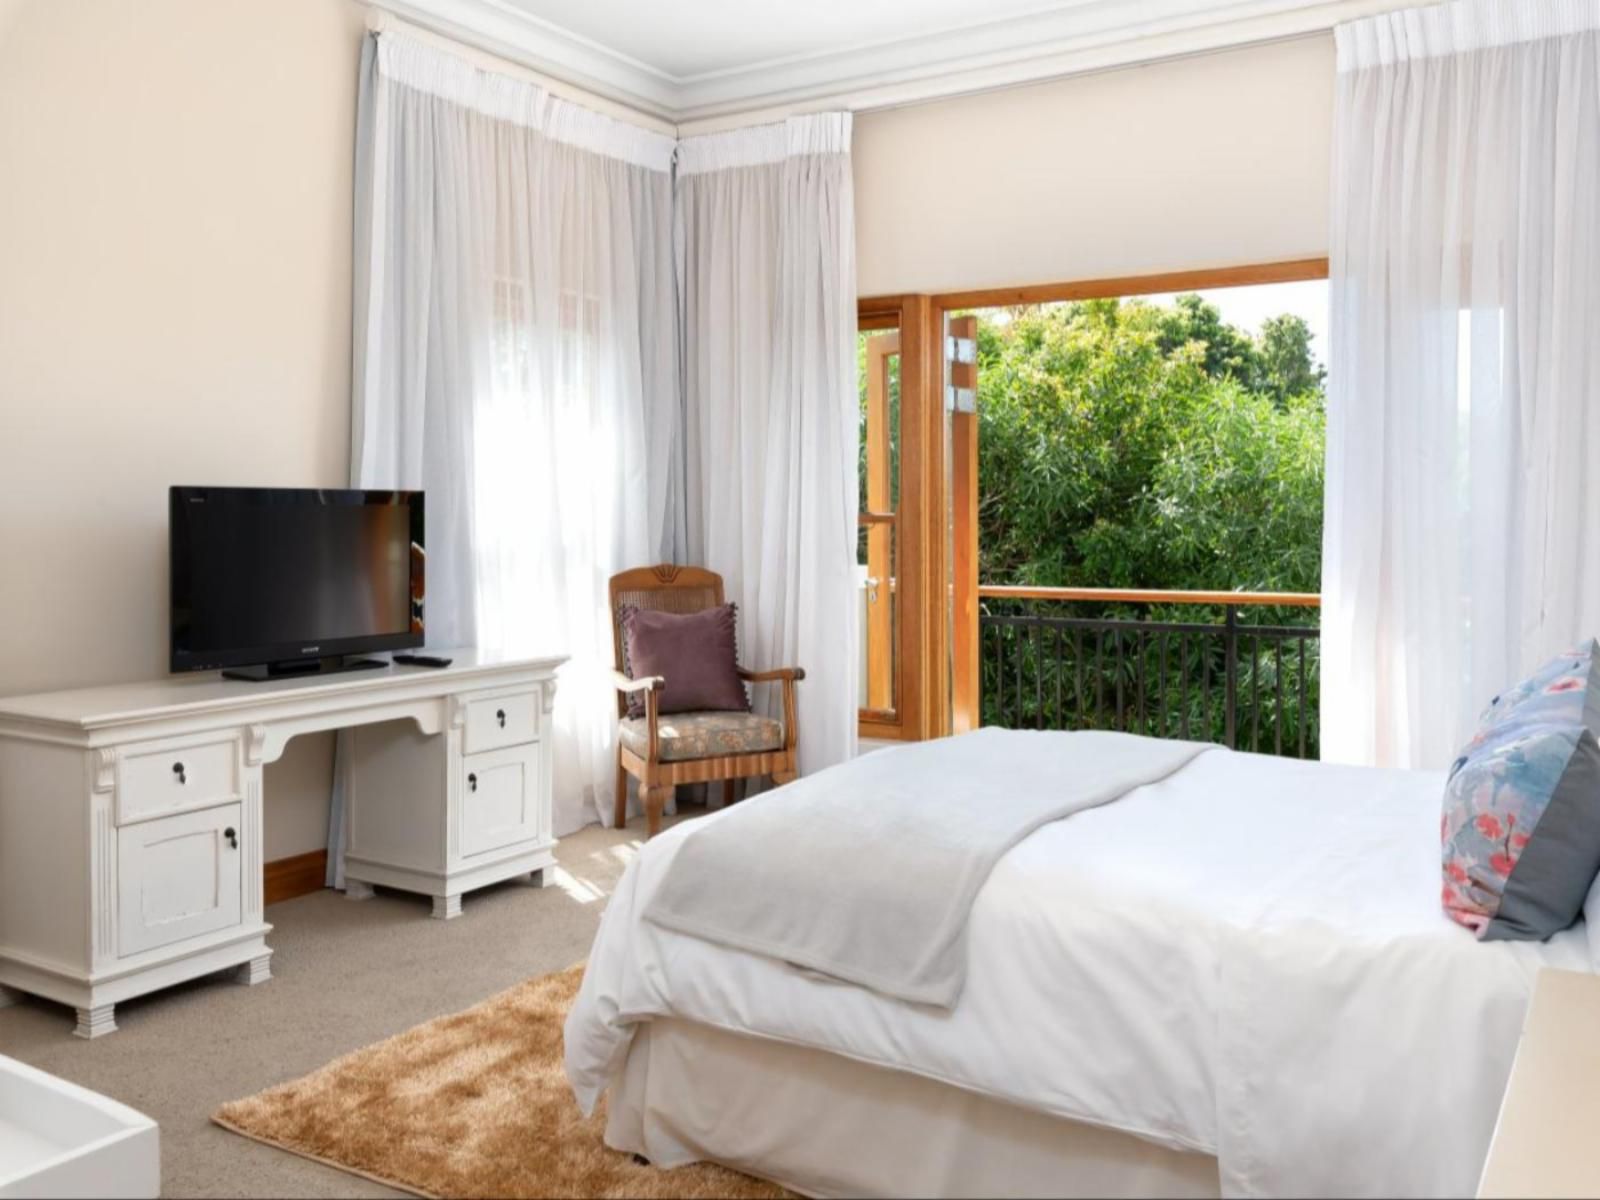 Thomson S Accommodation The Vines Constantia Cape Town Western Cape South Africa Bedroom